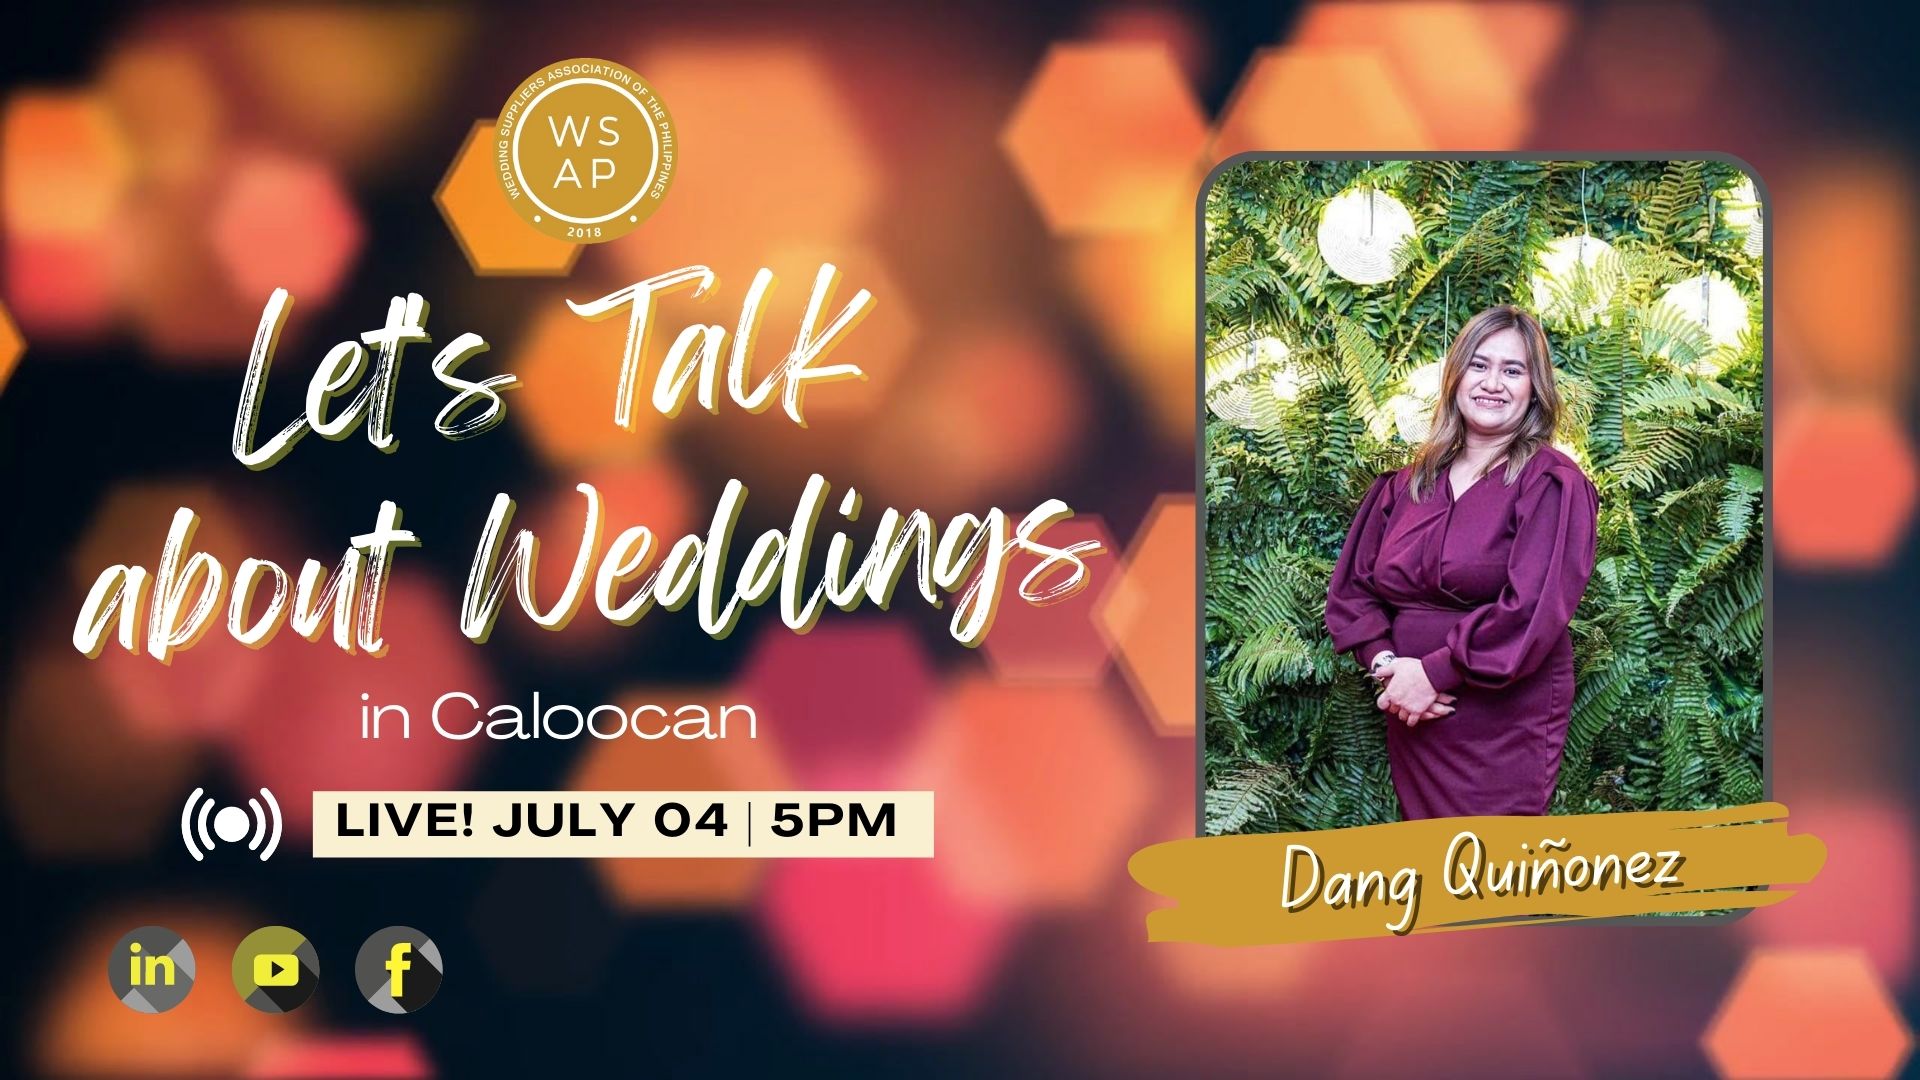 Let's Talk About Weddings in Caloocan with Dang Quiñonez